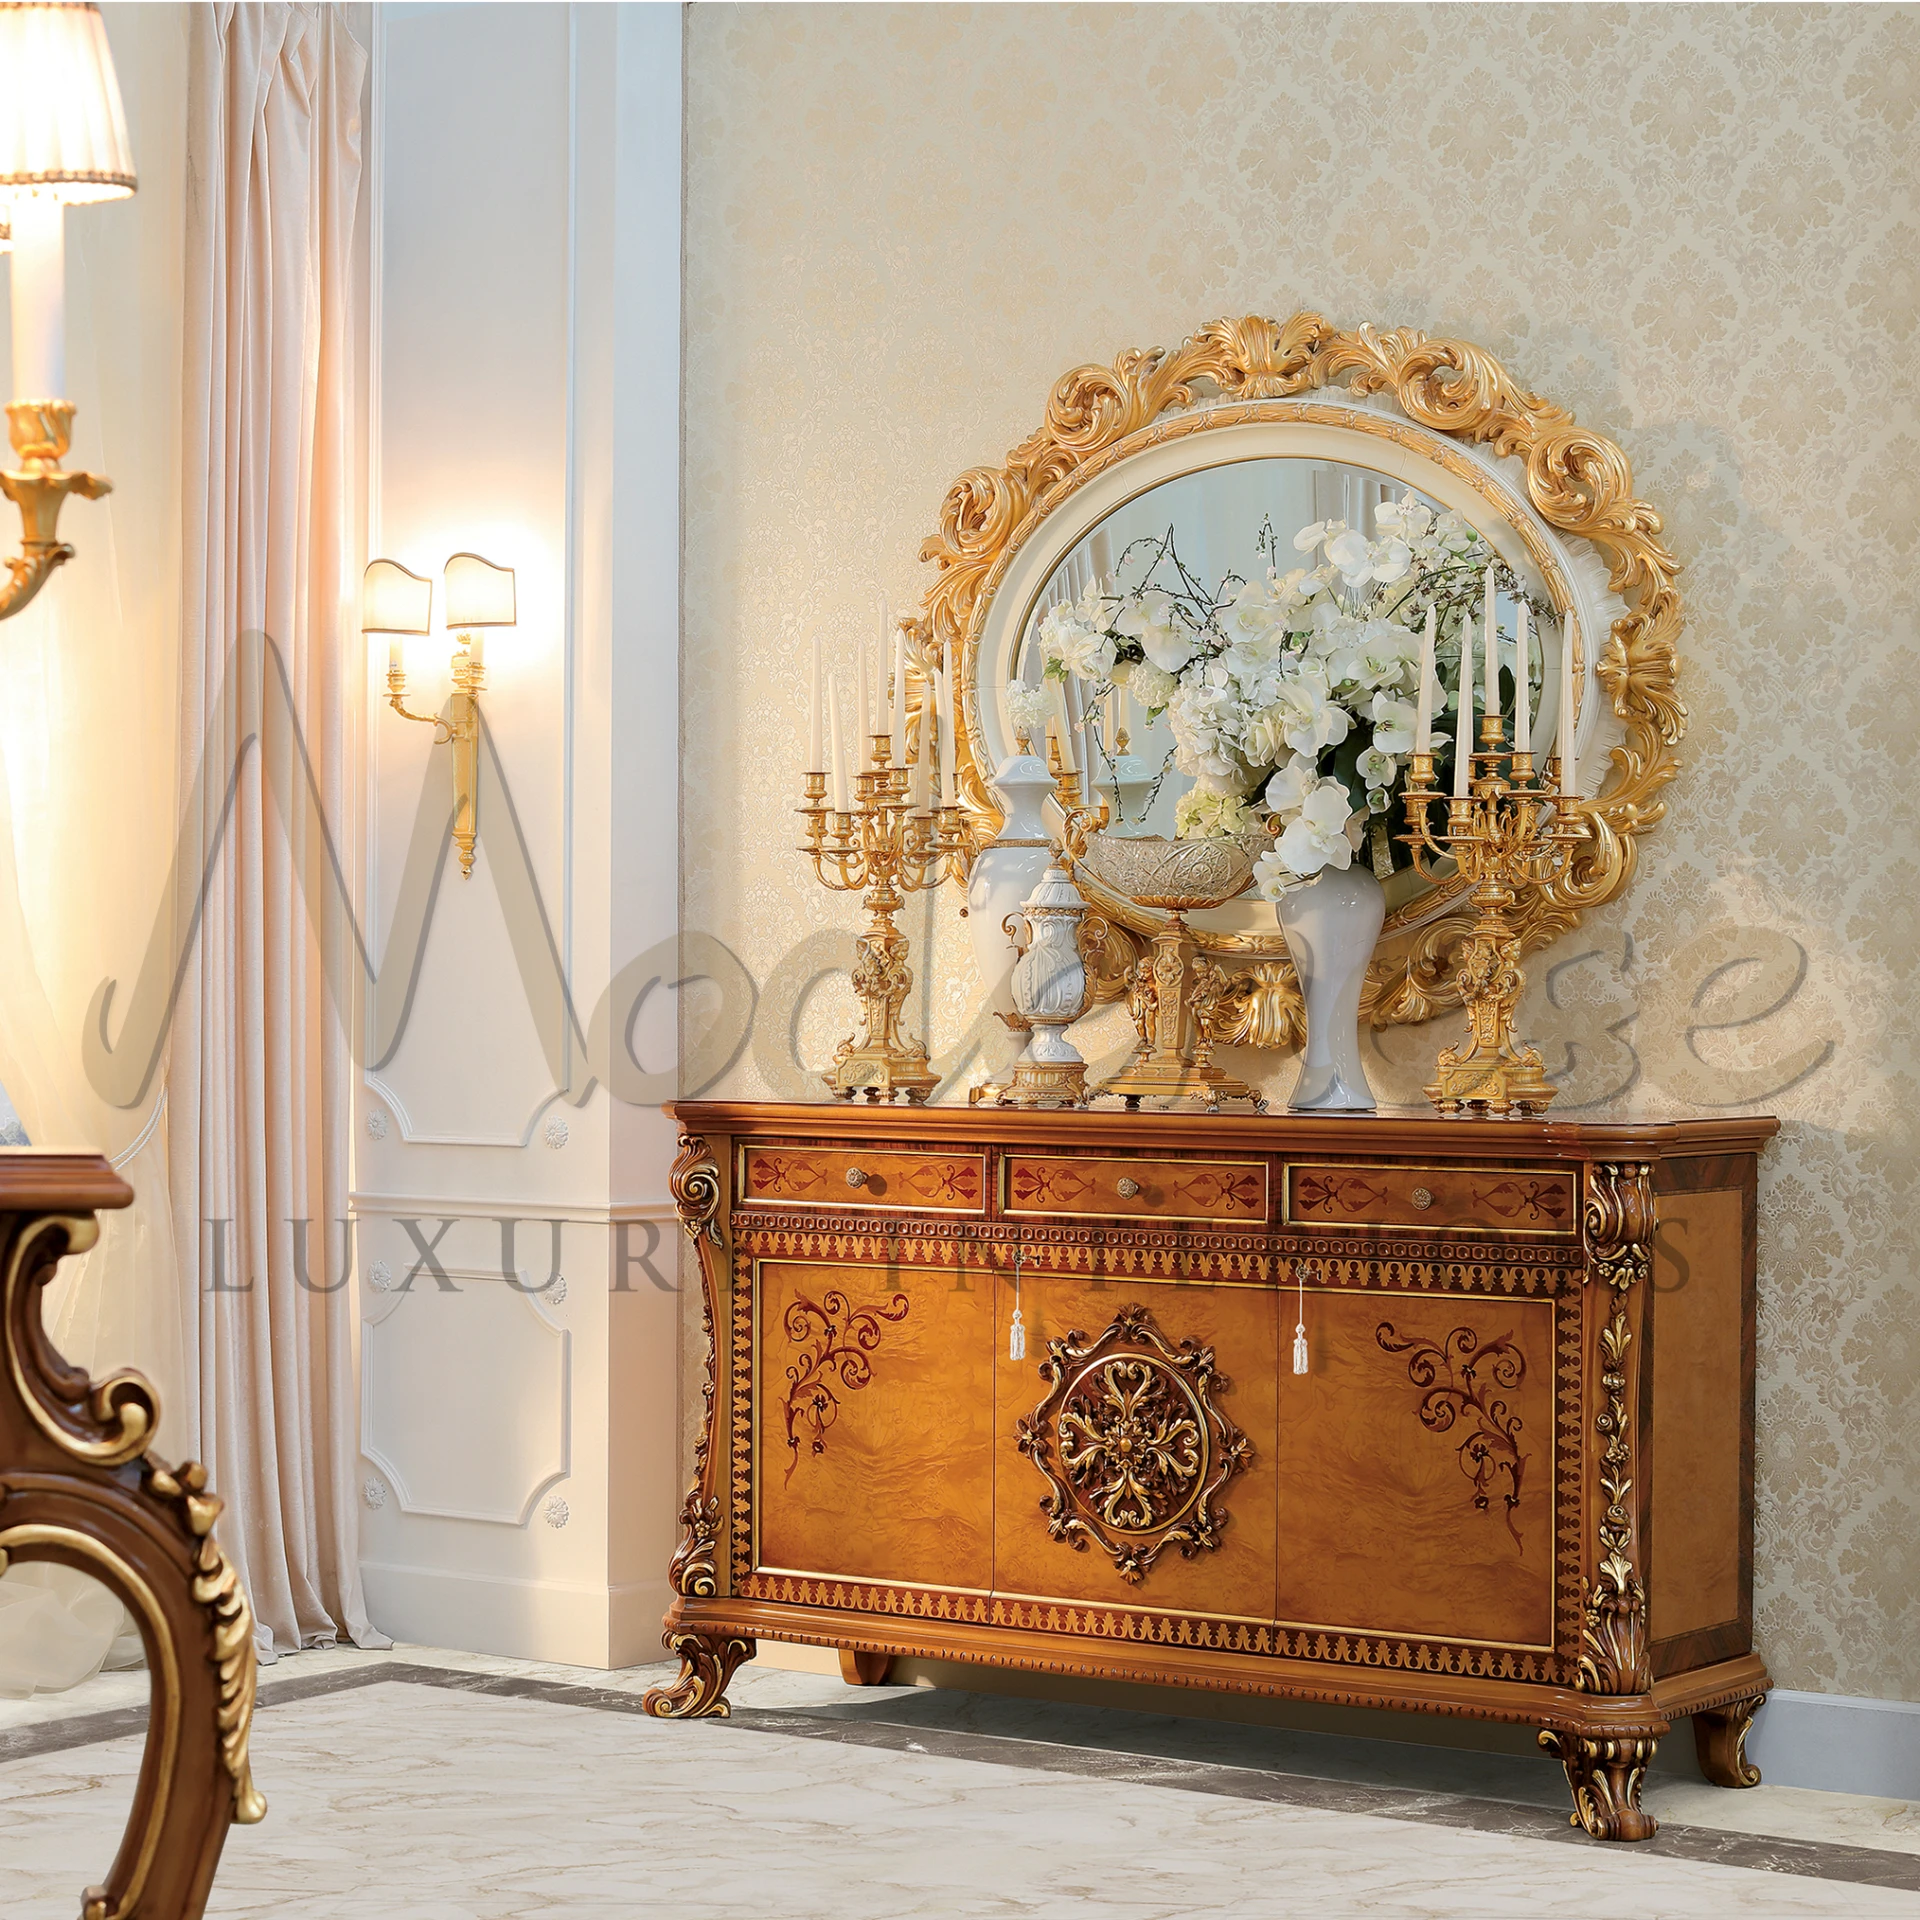 Fancy room with a gold mirror above a wooden Baroque Style Sideboard decorated with flowers.